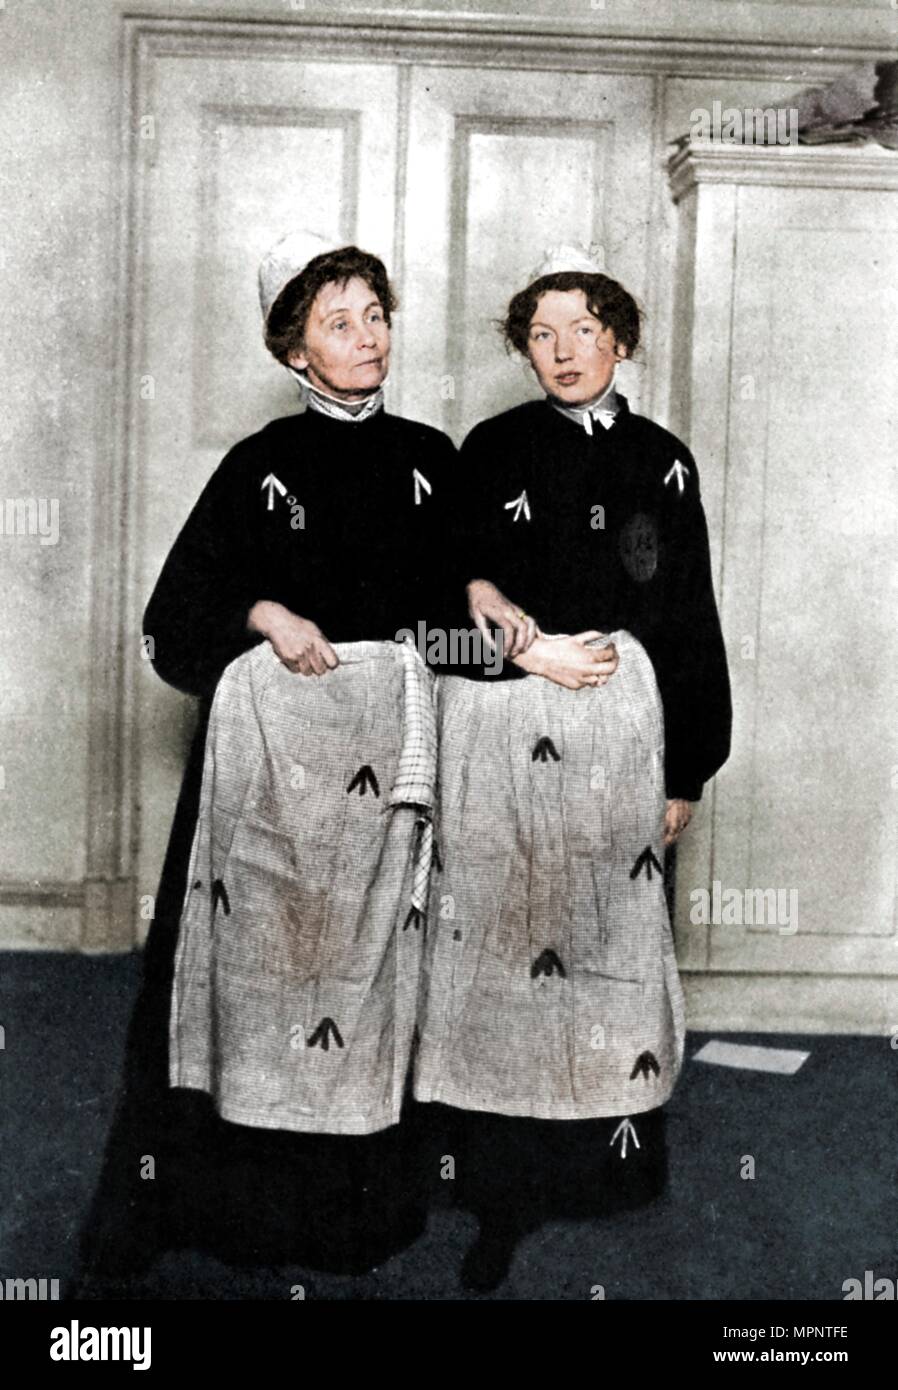 Emmeline and Christabel Pankhurst, English suffragettes, in prison dress, 1908. Artist: Unknown. Stock Photo